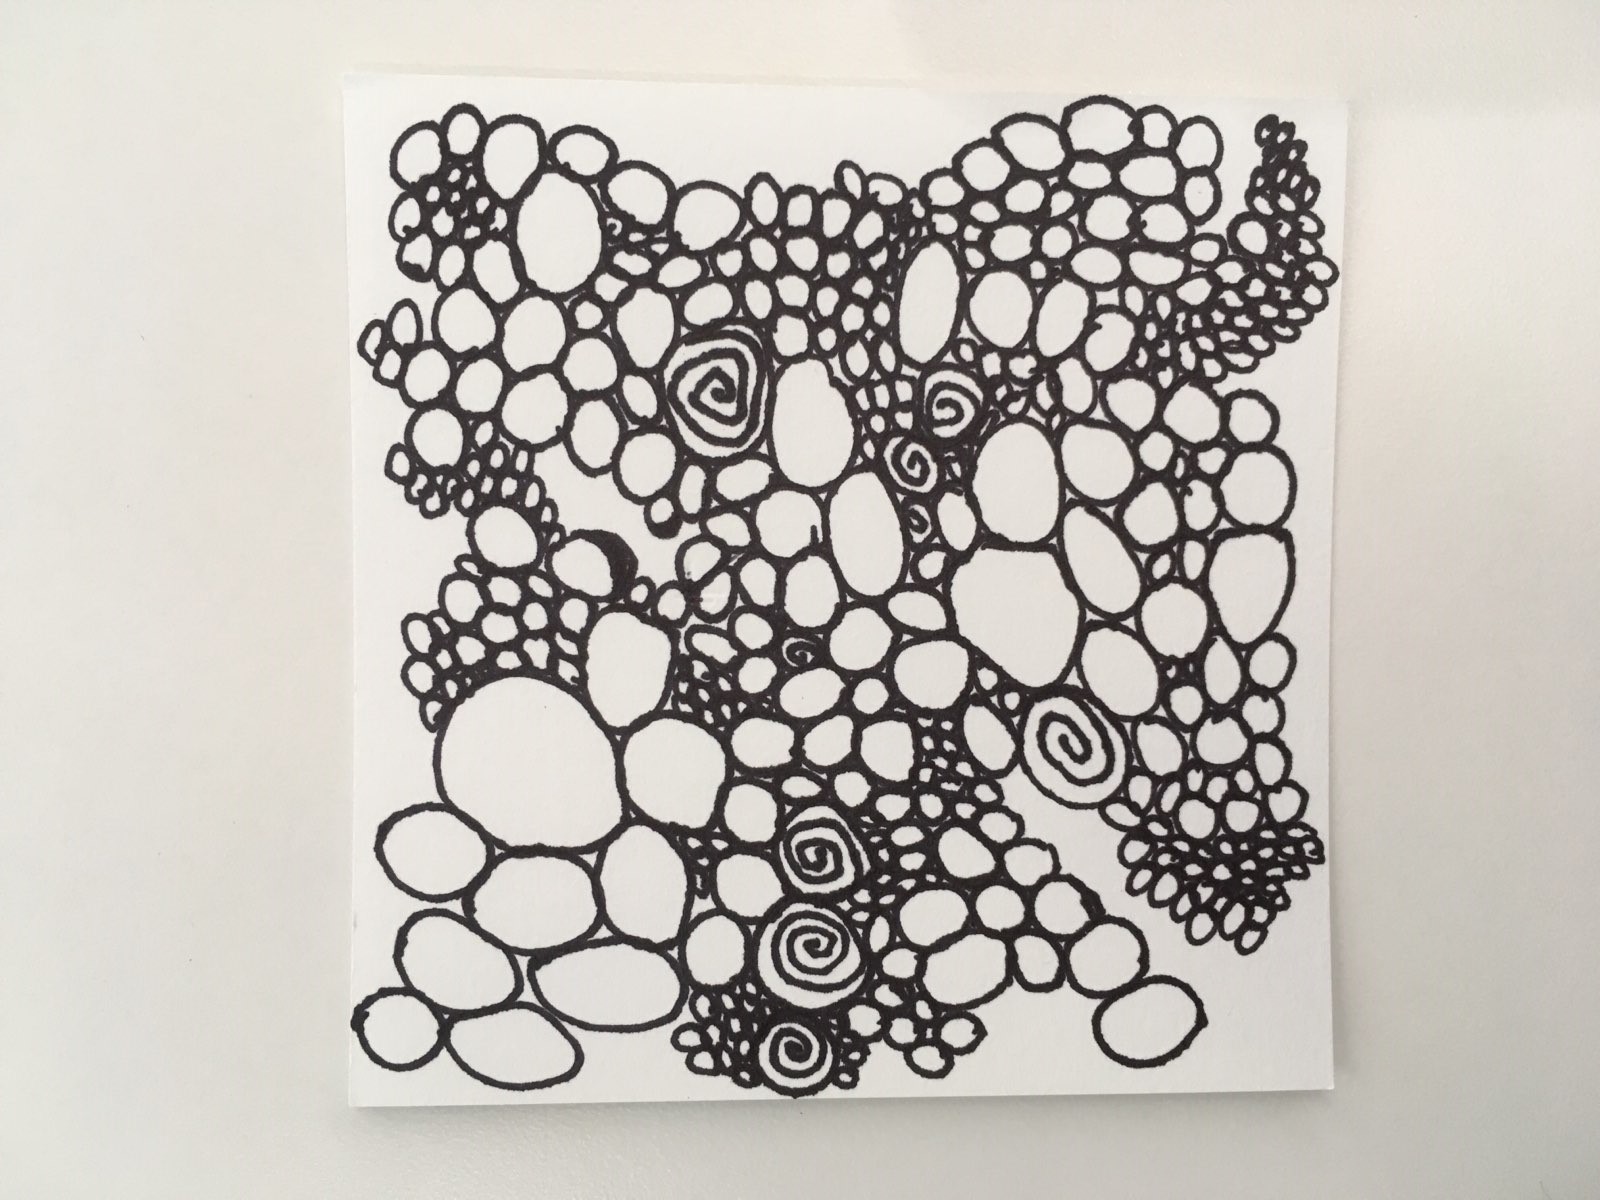 Paper square filled with randomly shaped and placed circles drawn with blank ink lines.